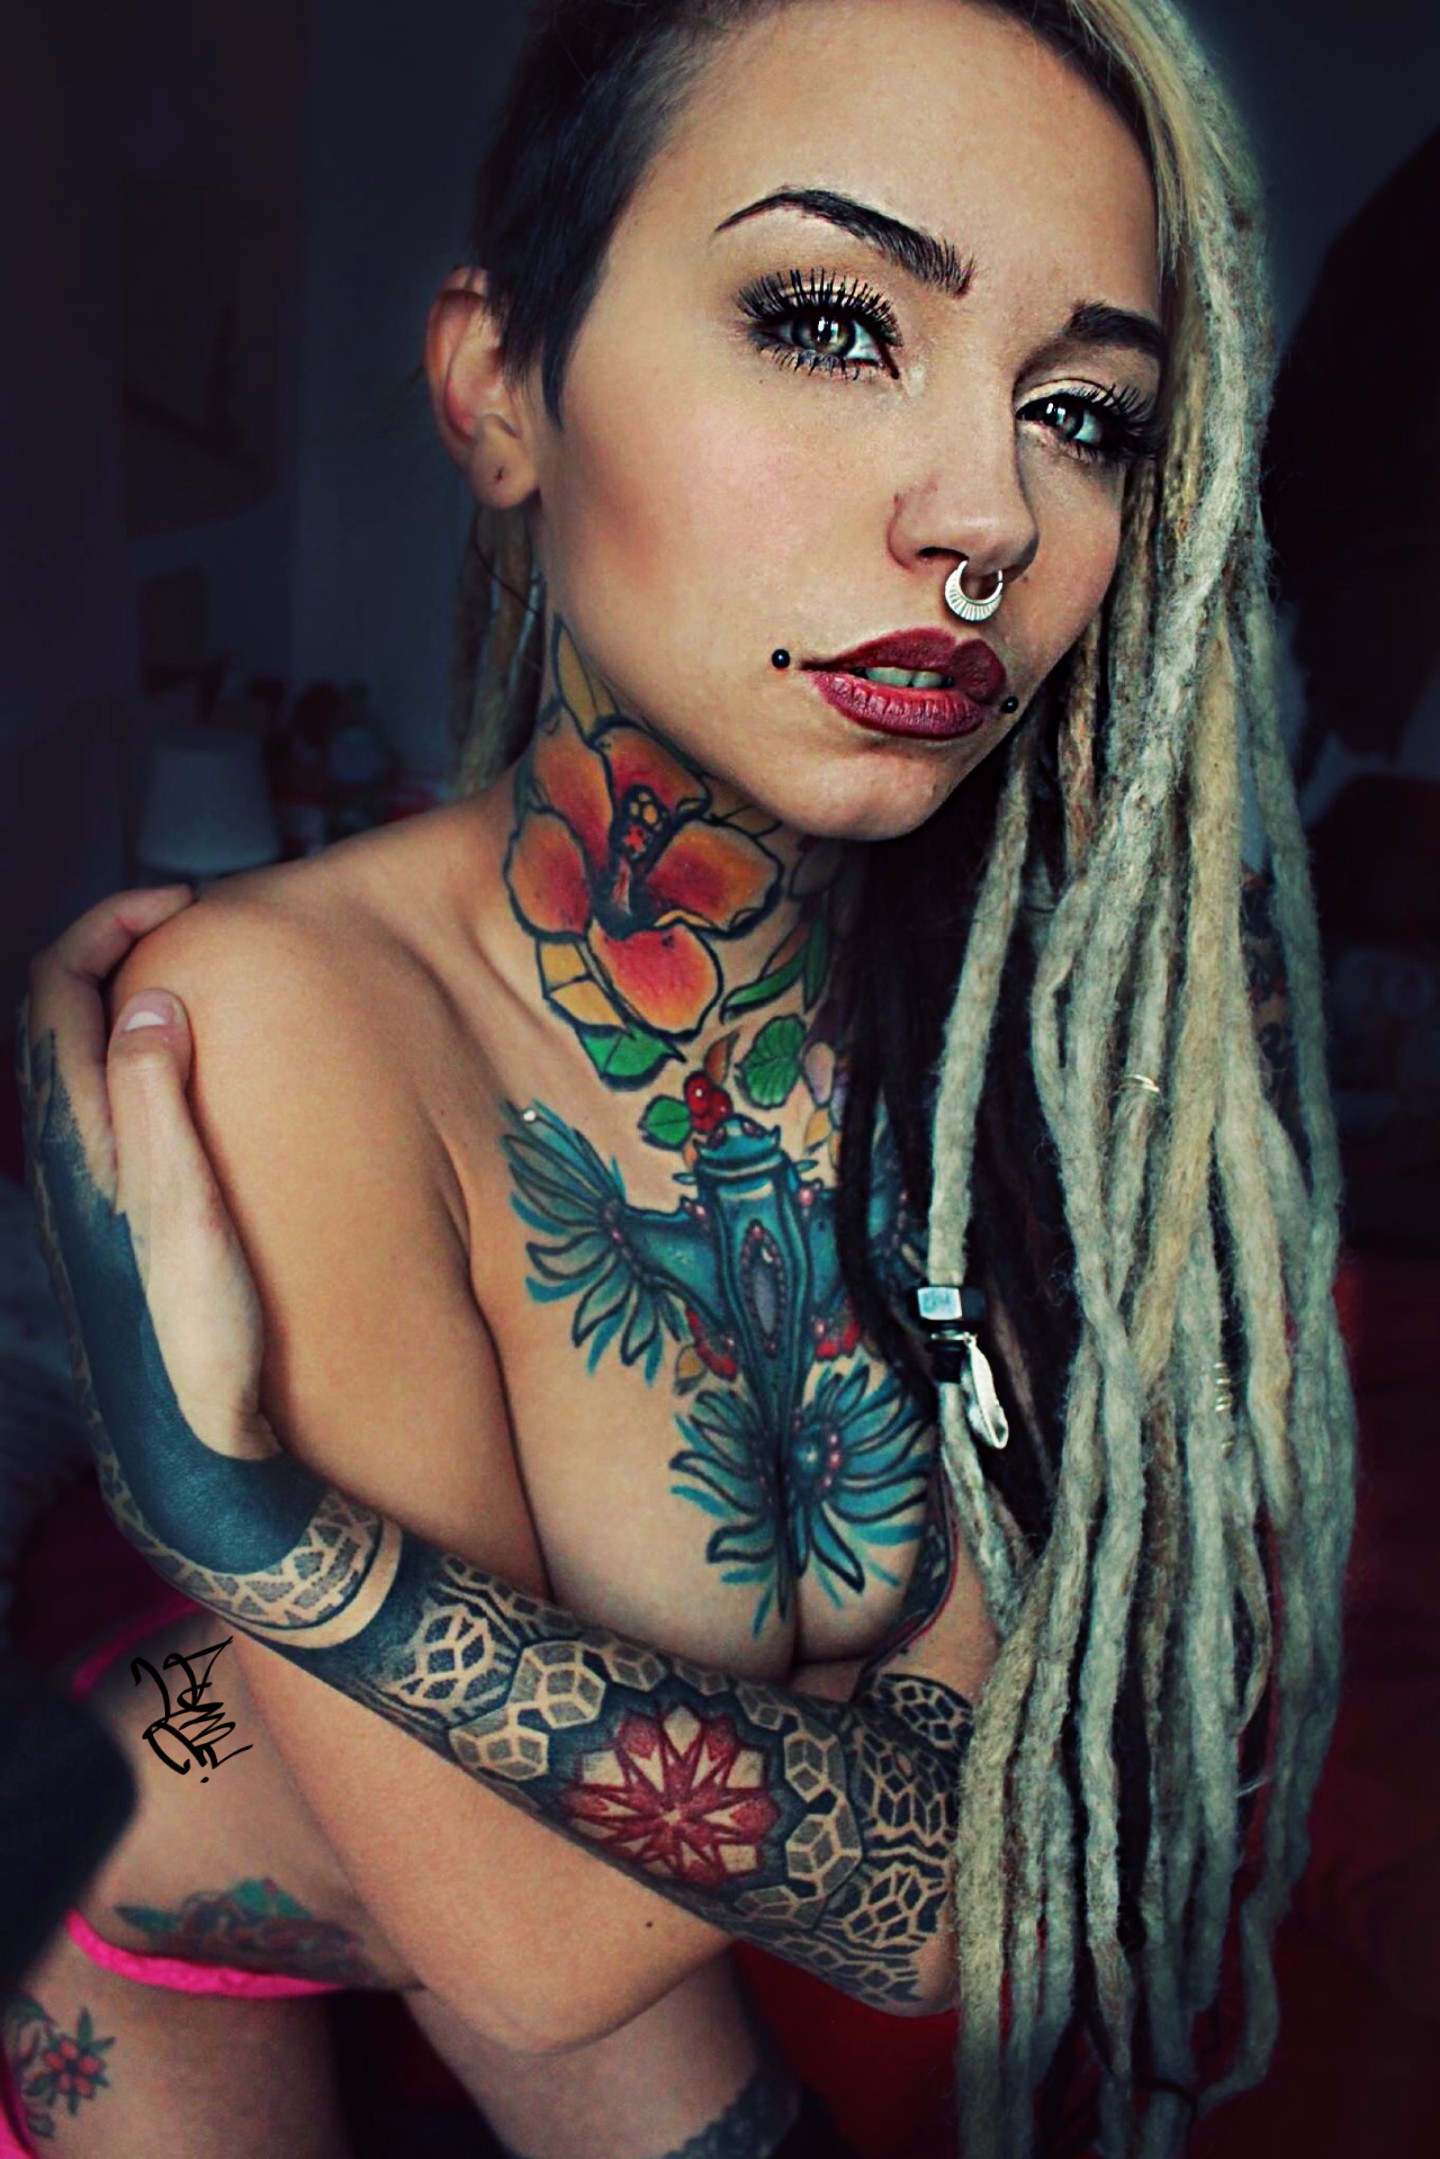 Naked Girls With Dreads